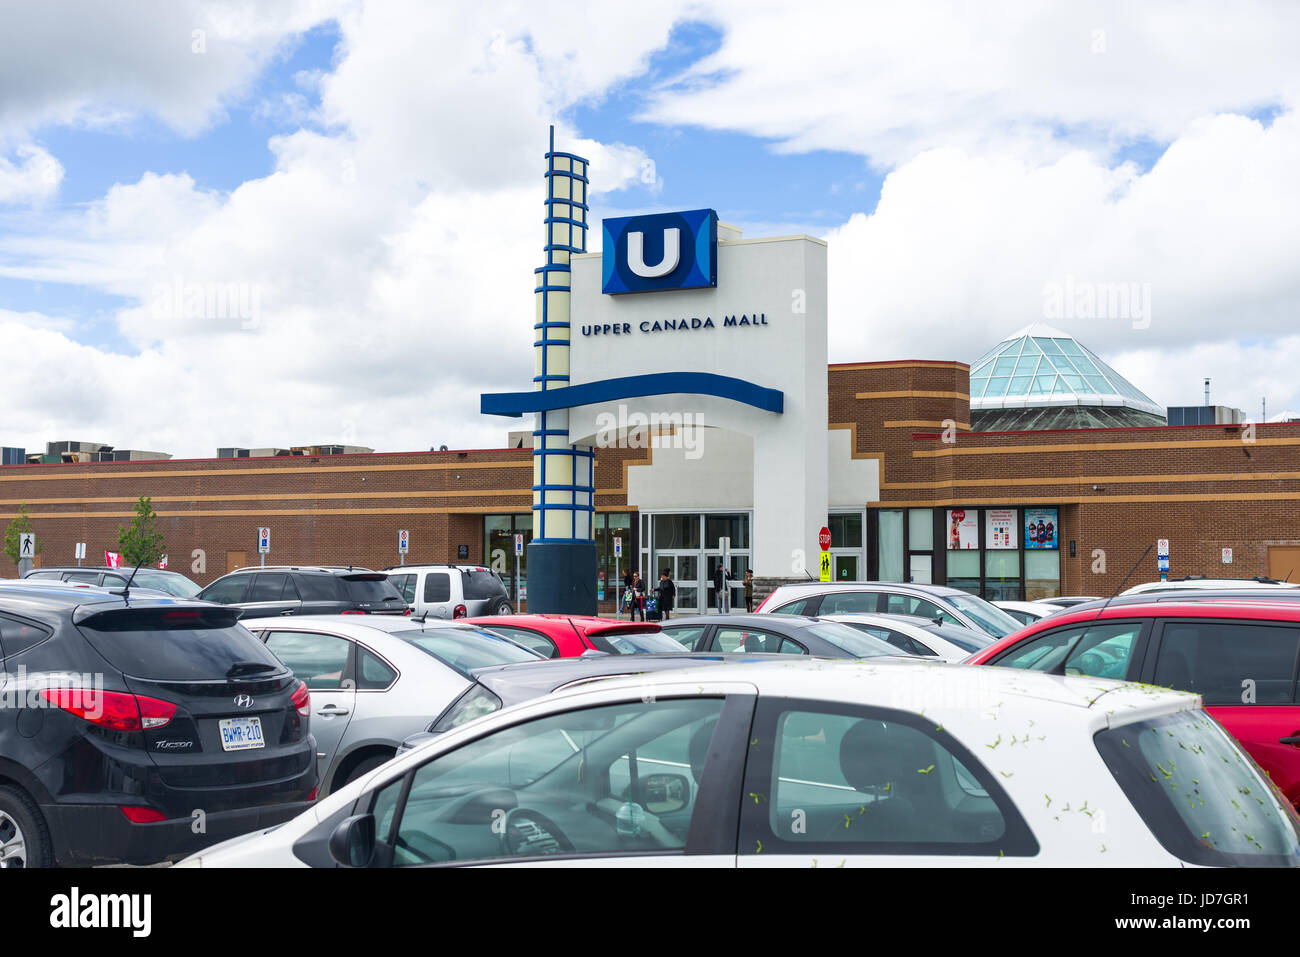 Upper Canada Mall Brand Logo On Building Exterior Stock Photo